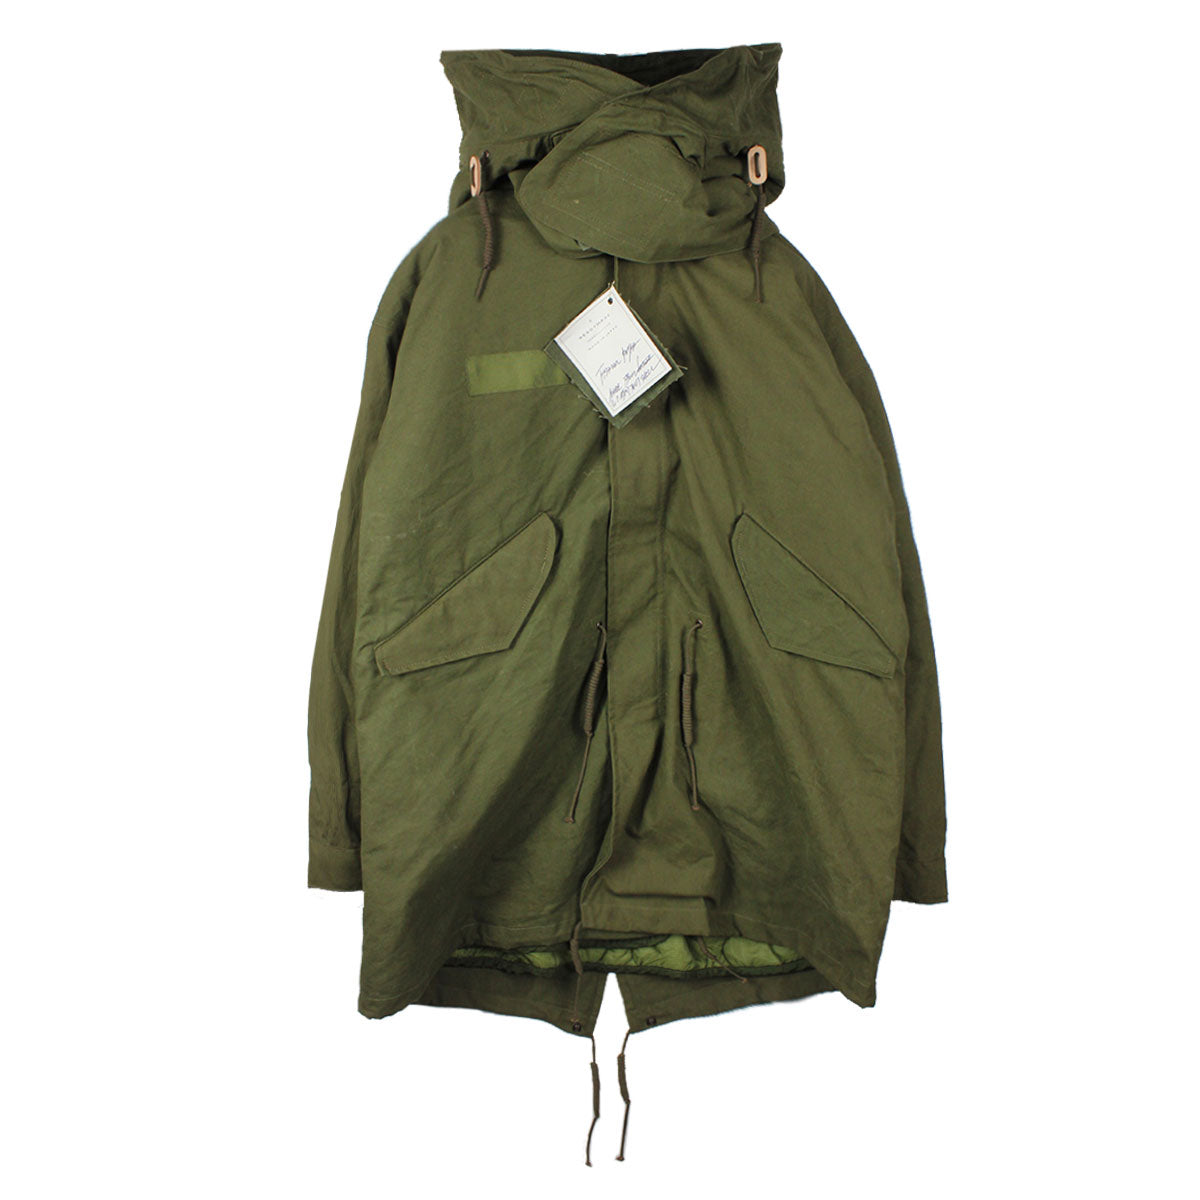 Fishtail Parka – Why are you here?